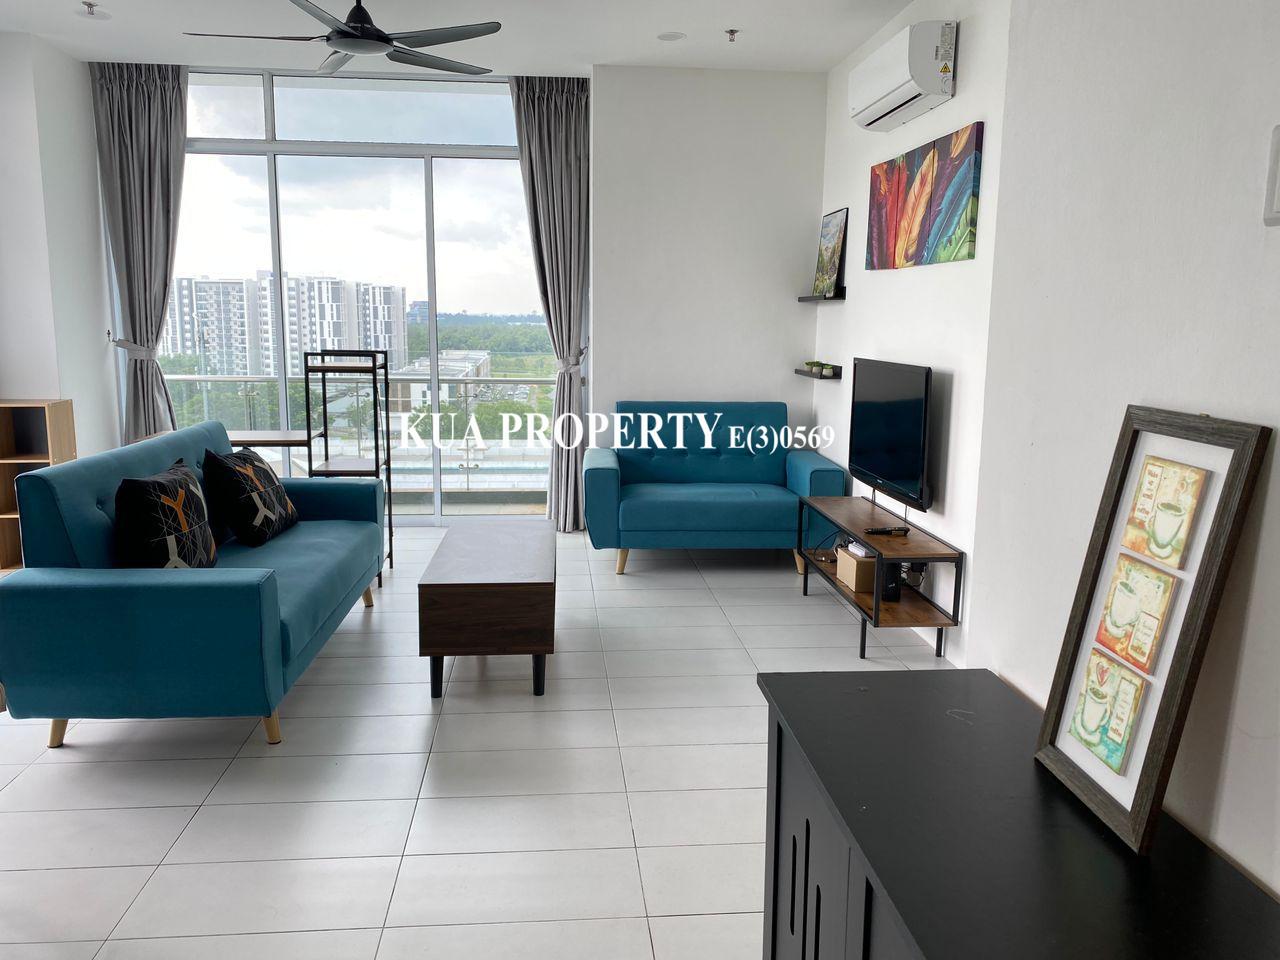 TT3 SOHO Apartment FOR RENT! Located at Tabuan tranquility